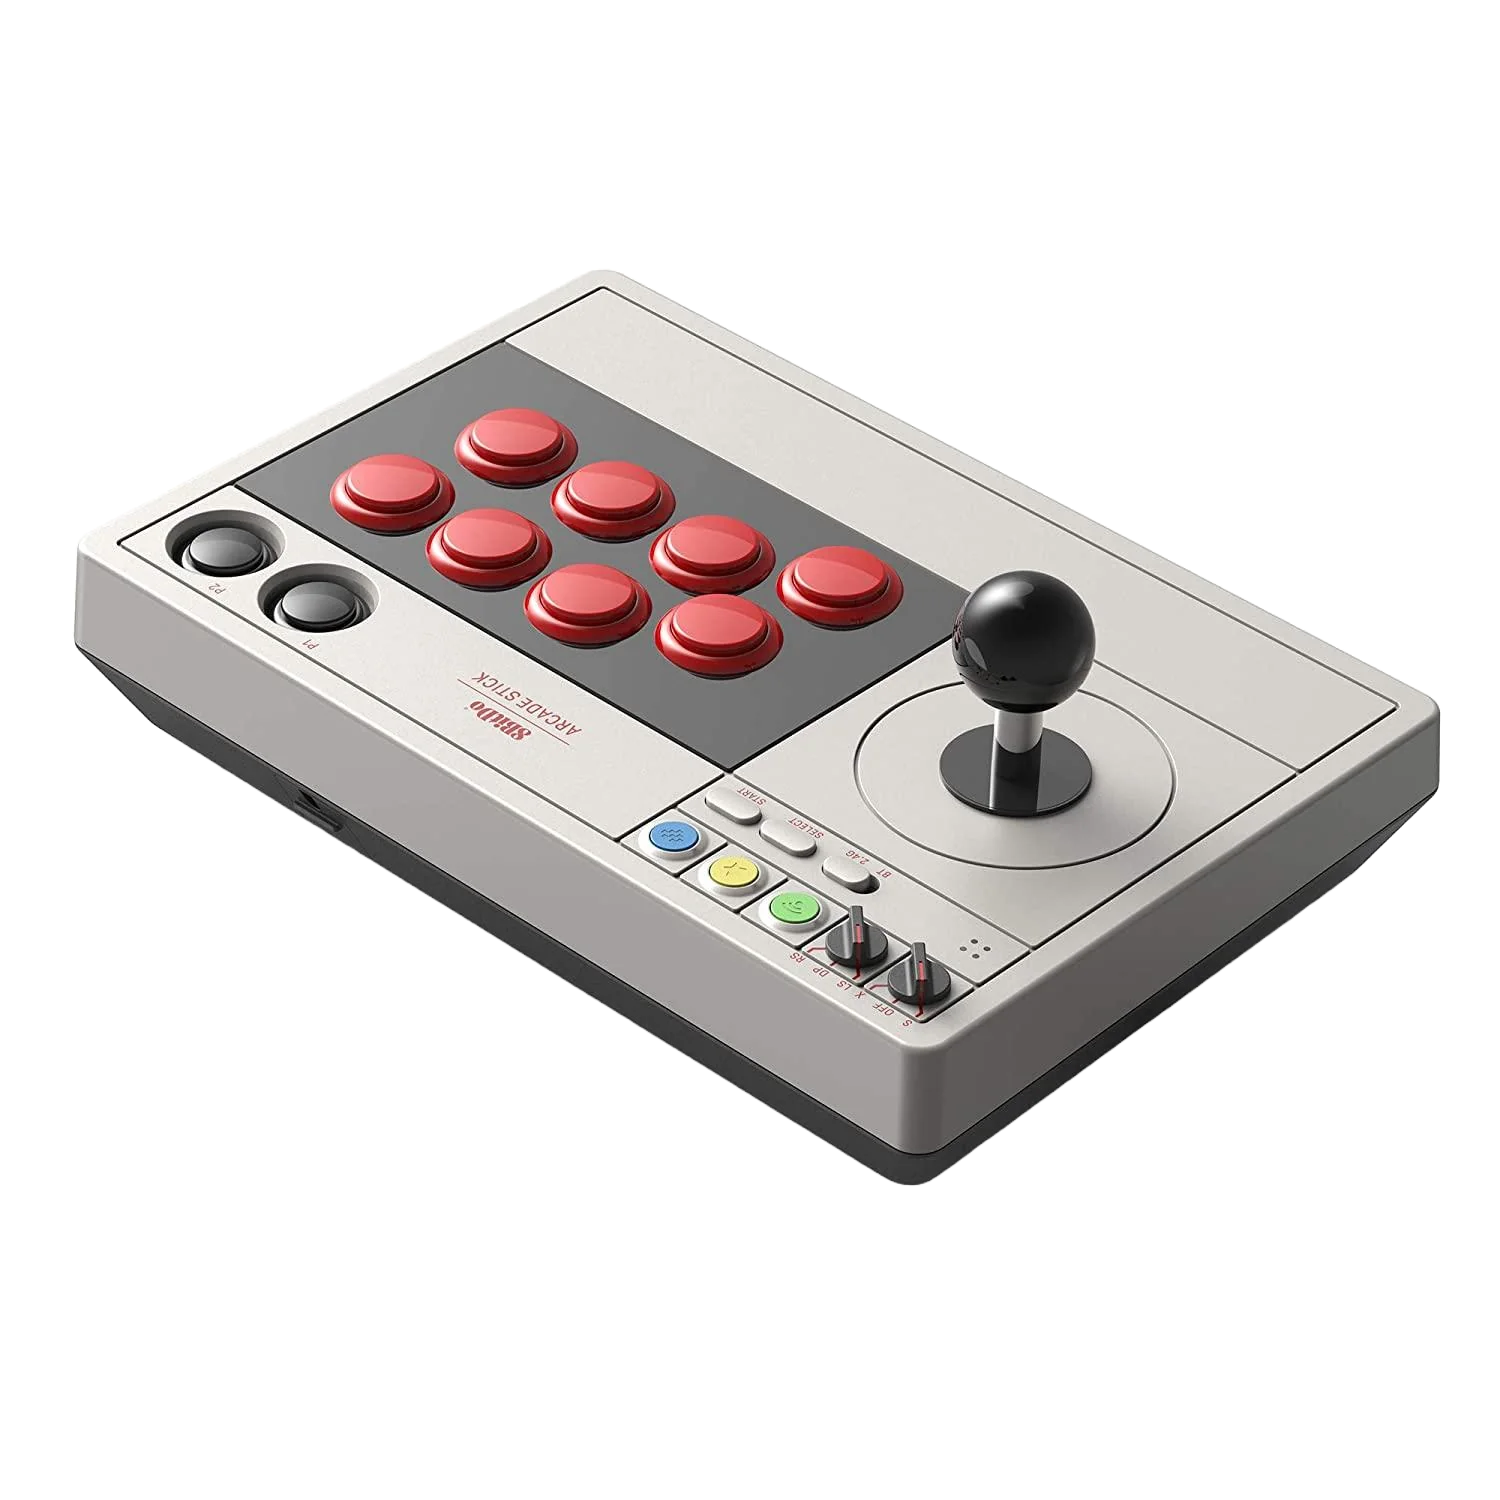 A PNG render of the 8BitDo Arcade Stick on a transparent background.